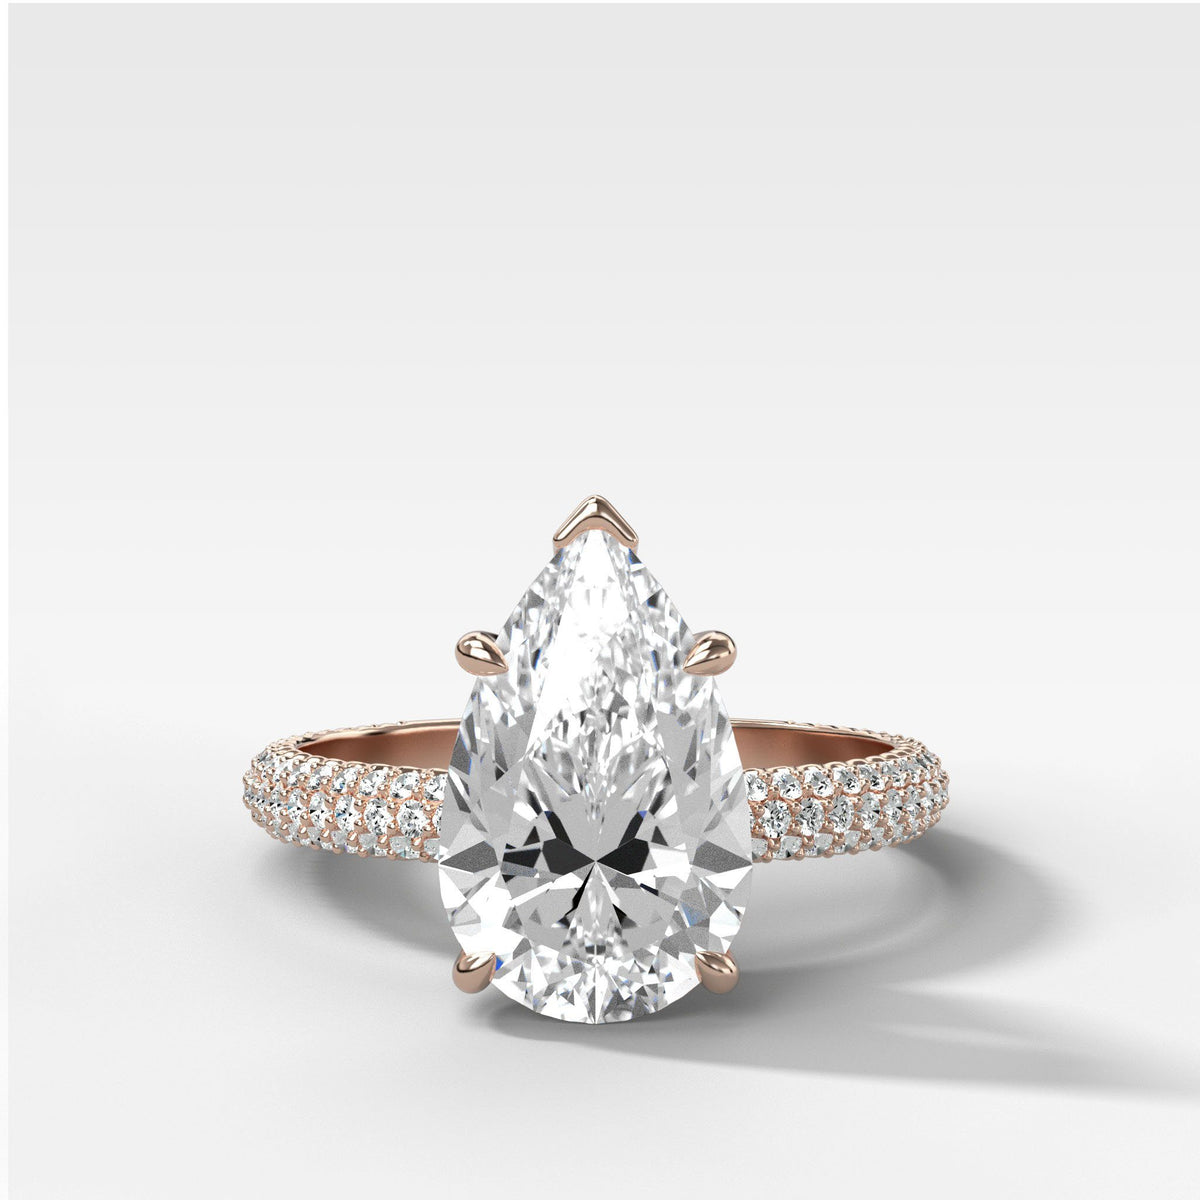 Triple Row Pav≈Ω Engagement Ring With Pear Cut by Good Stone in Rose Gold